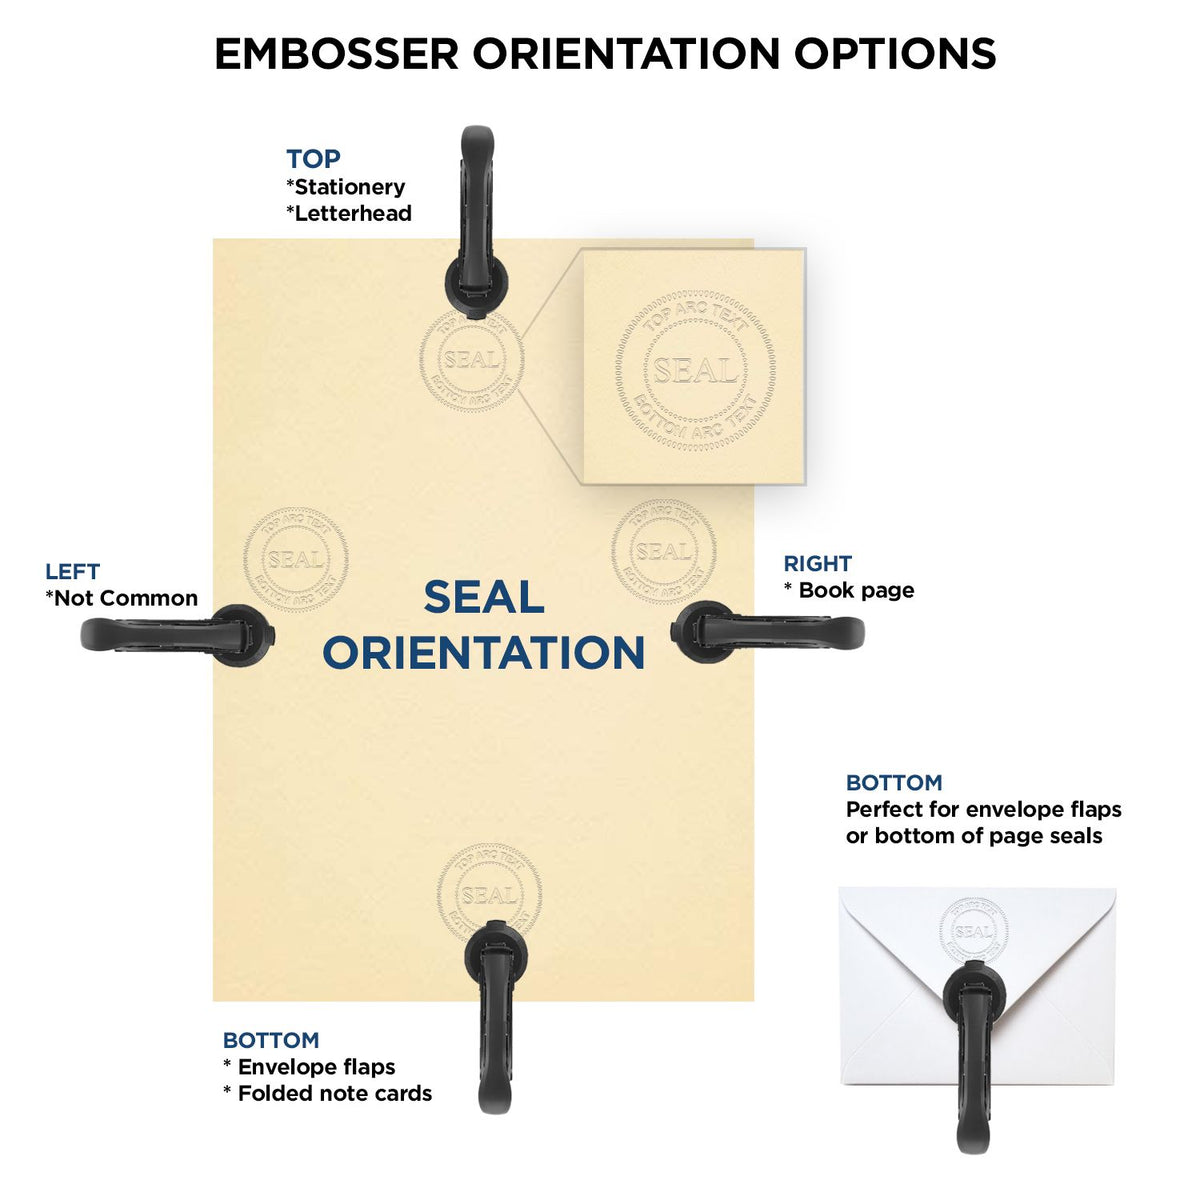 An infographic for the Florida Engineer Desk Seal showing embosser orientation, this is showing examples of a top, bottom, right and left insert.